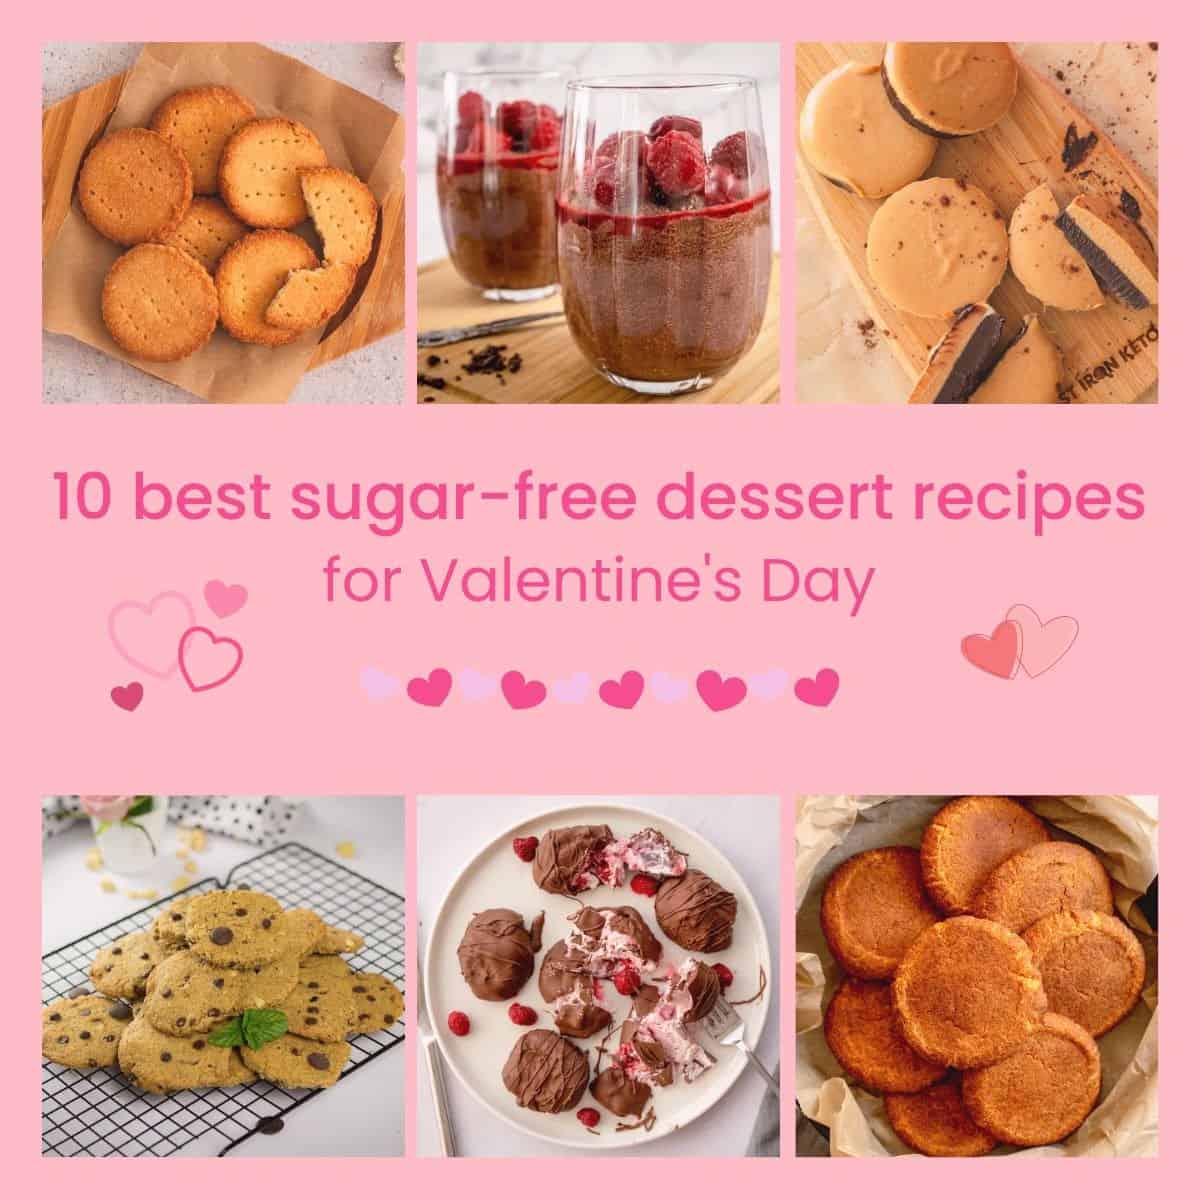 A photo collection of sugar-free desserts for the Valentine's day.